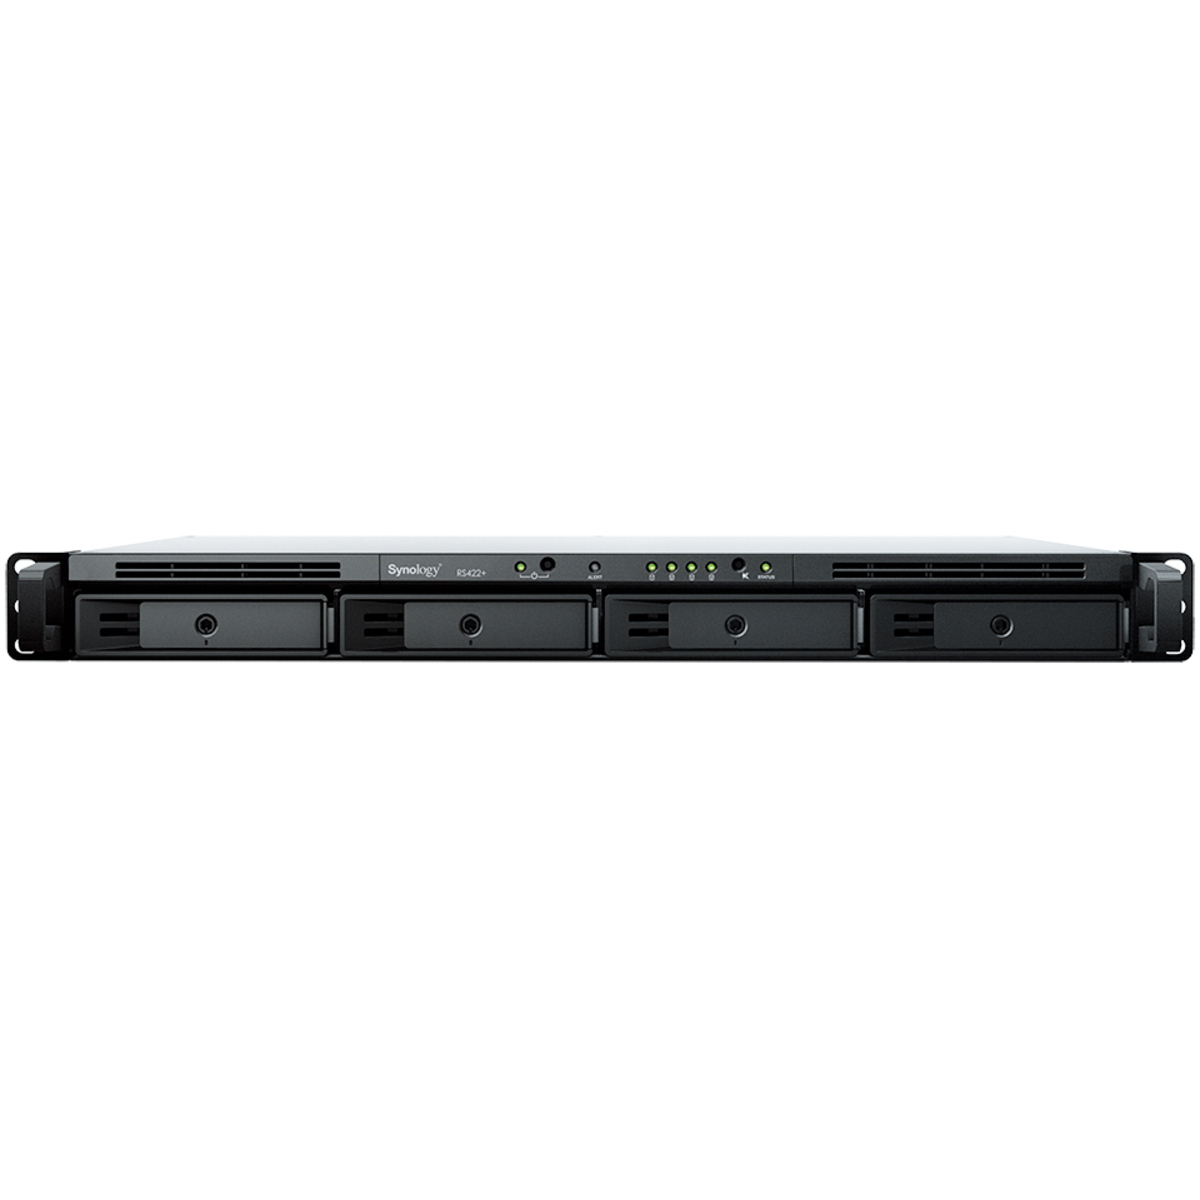 Synology RackStation RS422+ 16tb 4-Bay RackMount Personal / Basic Home / Small Office NAS - Network Attached Storage Device 4x4tb Sandisk Ultra 3D SDSSDH3-4T00 2.5 560/520MB/s SATA 6Gb/s SSD CONSUMER Class Drives Installed - Burn-In Tested RackStation RS422+